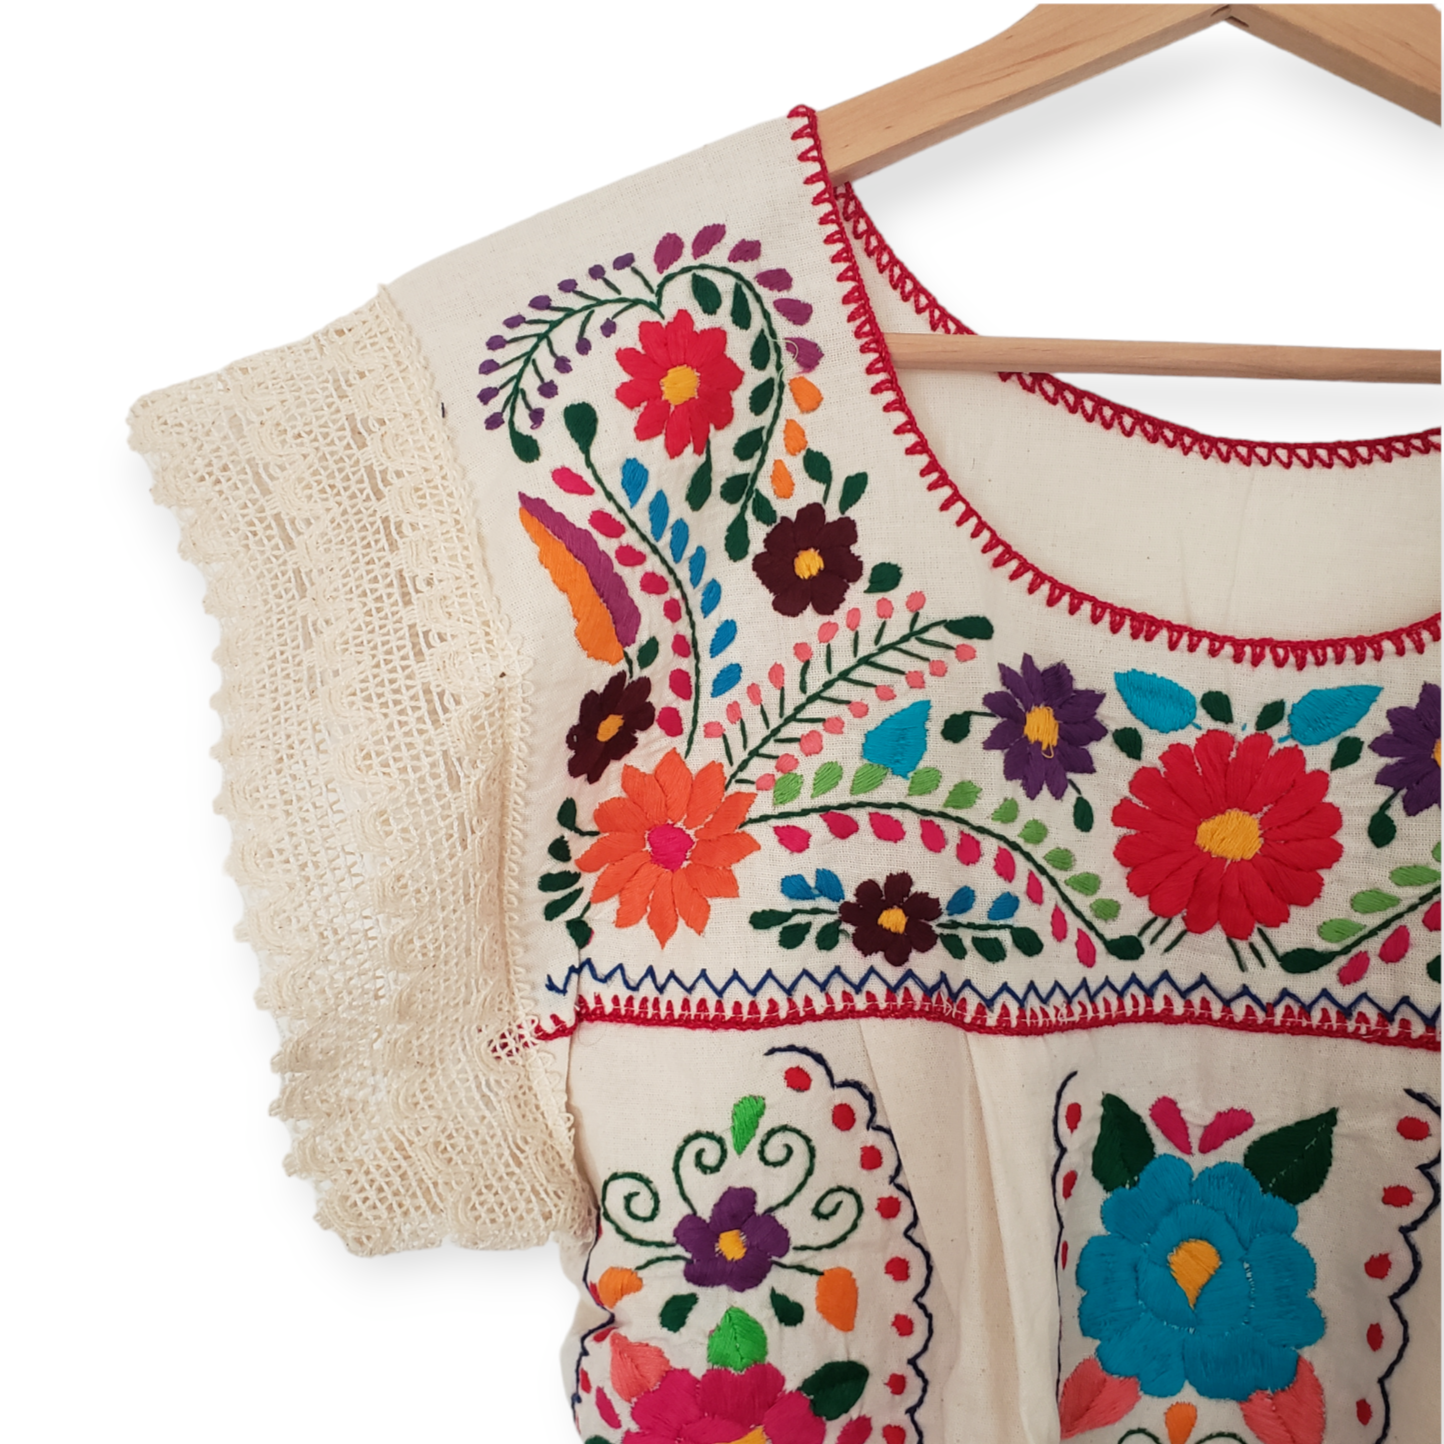 Traditional Mexican Embroidered Shirt Floral Top Blouse Handmade Beige Gypsy Hippie Ethnic Peasant Boho  Oaxaca Floral